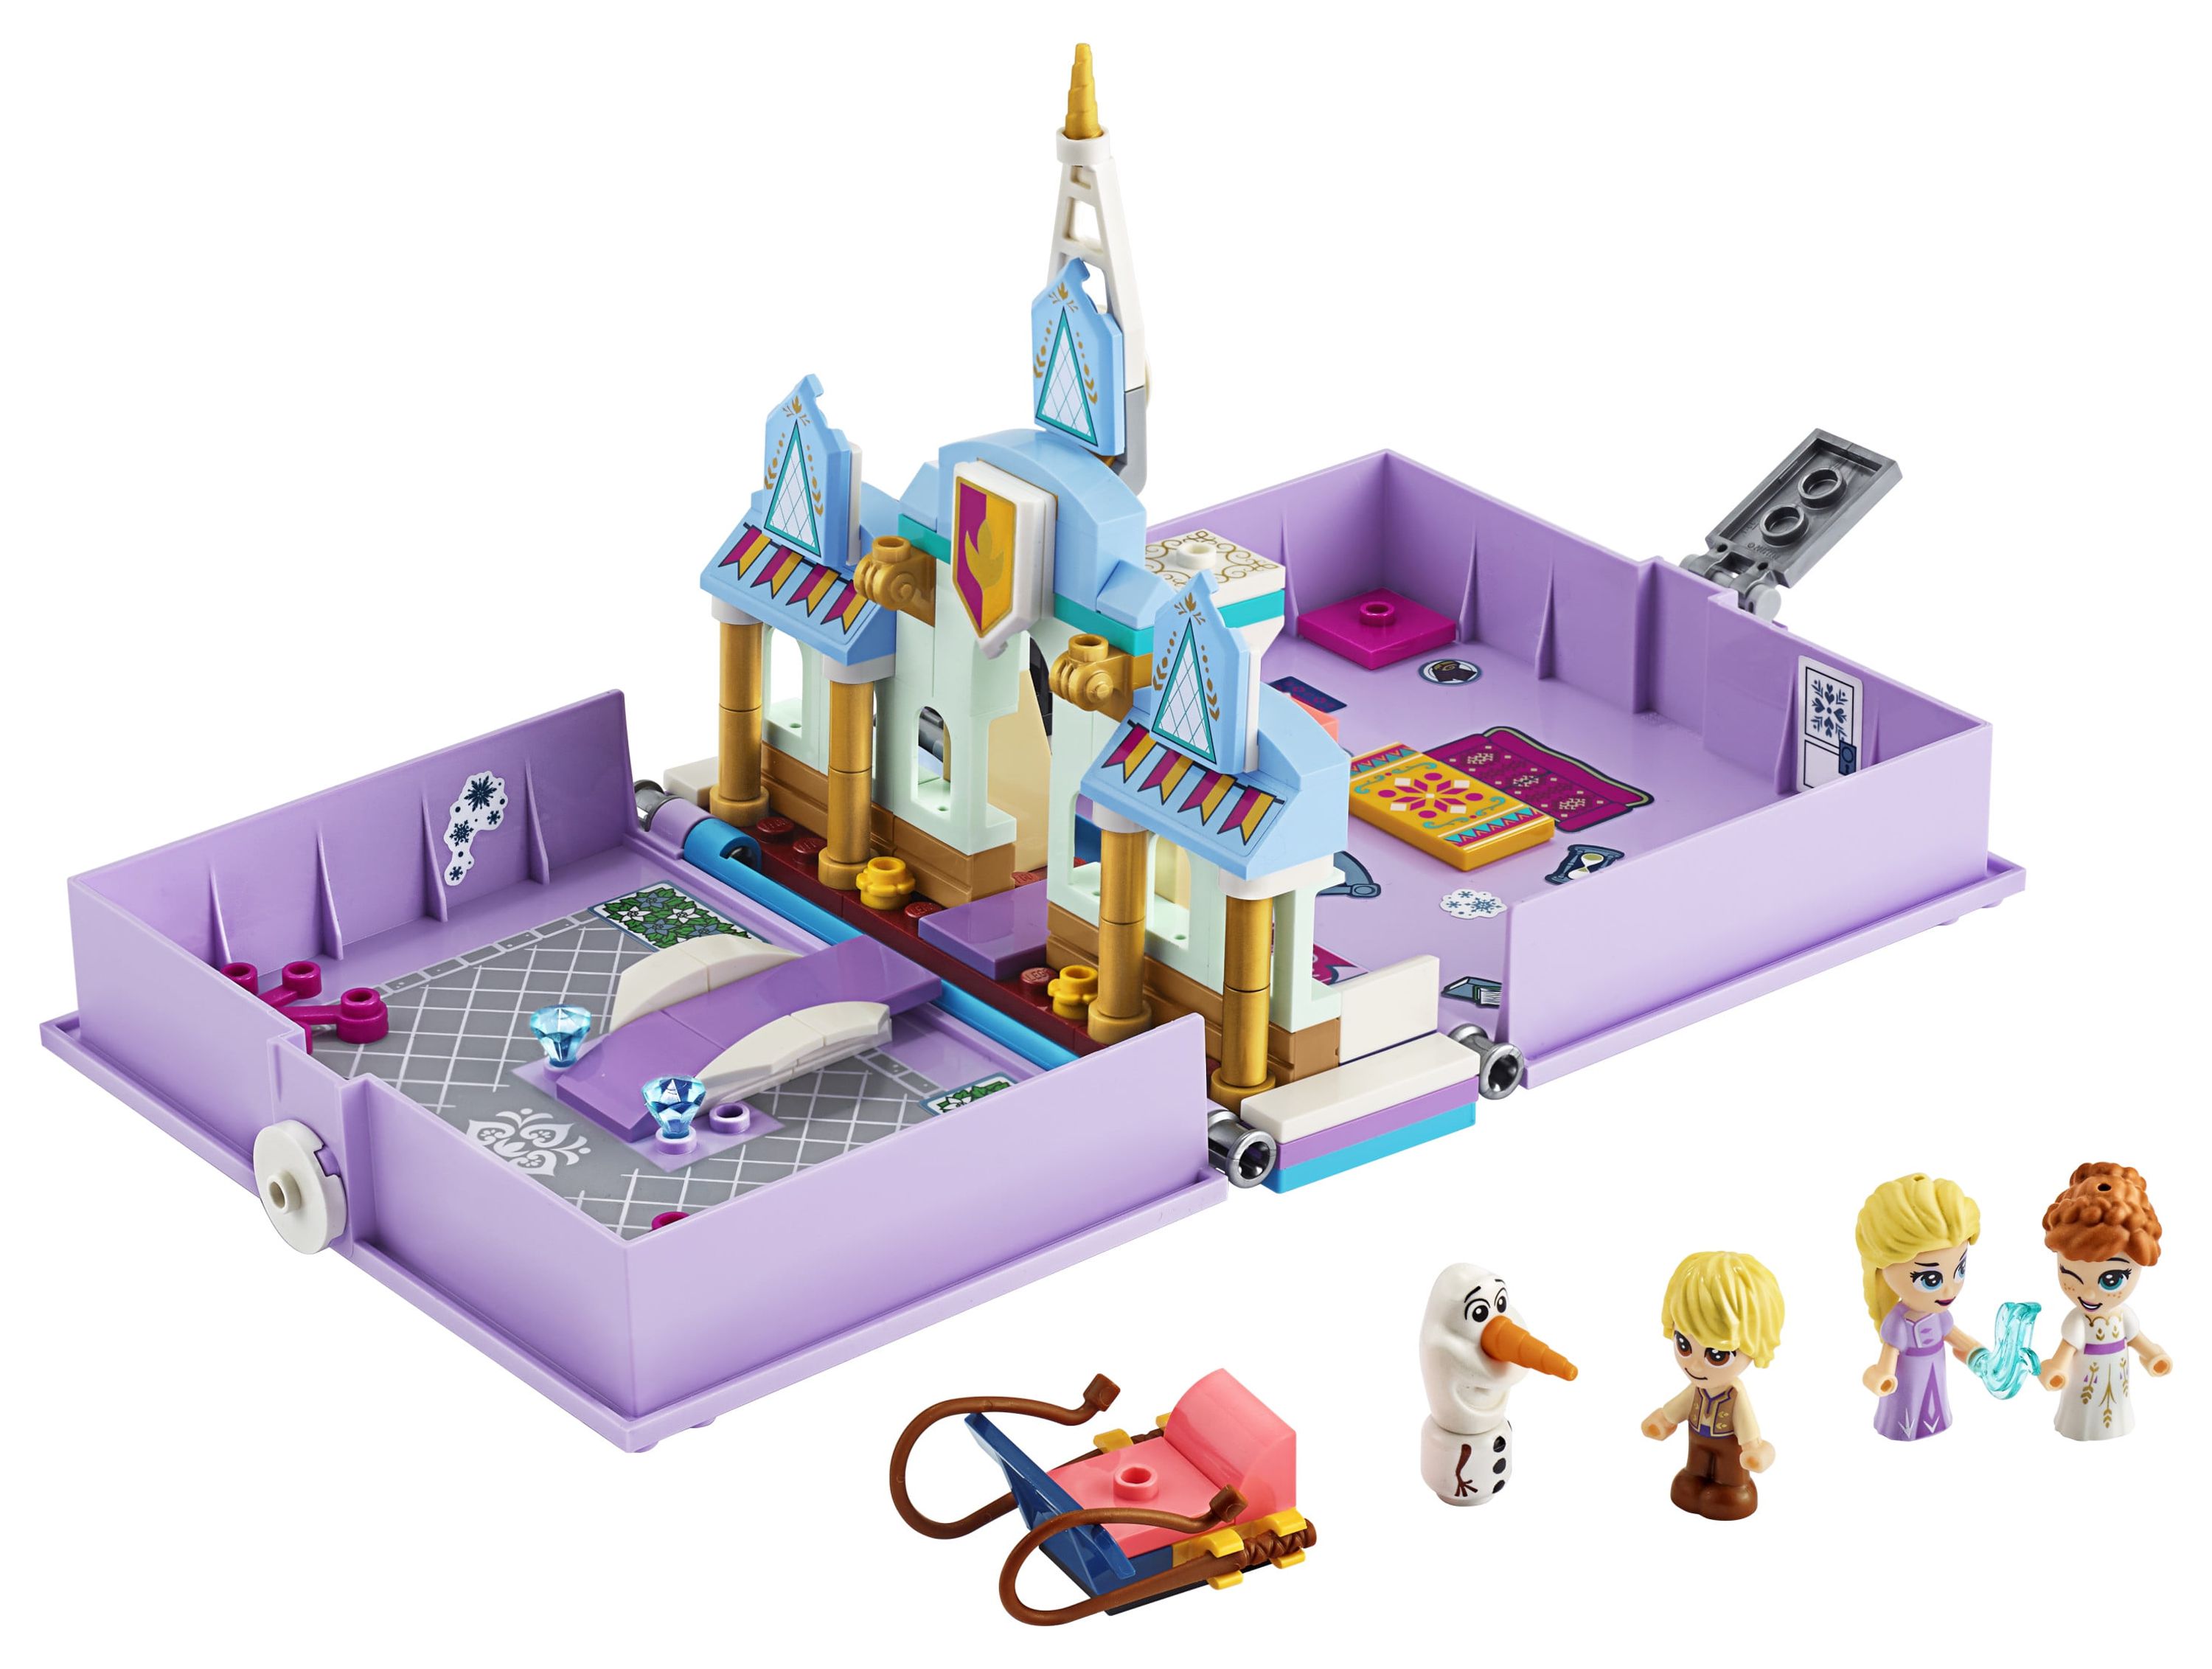 LEGO Disney Anna and Elsa’s Storybook Adventures 43175 Creative Building Kit (133 Pieces) - image 3 of 7